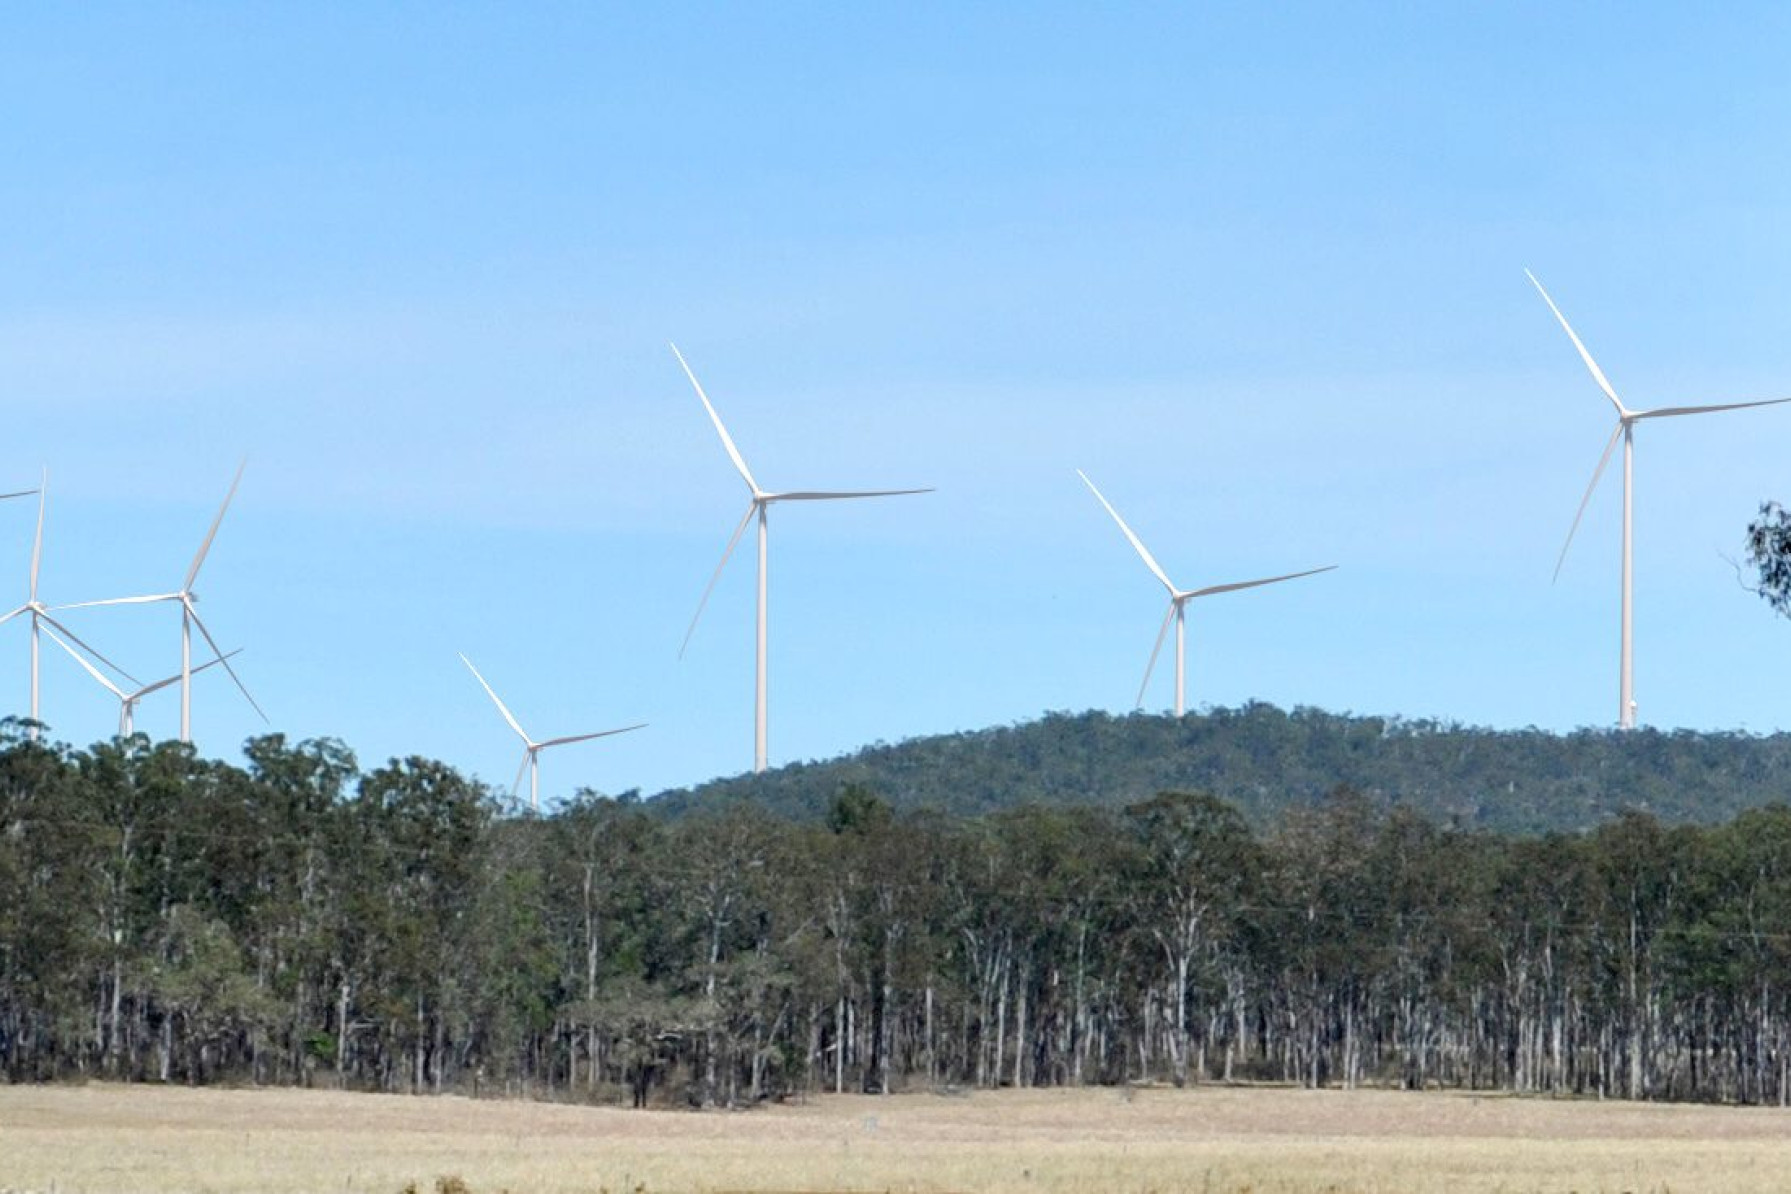 New wind farm expected to generate 150 local jobs - feature photo